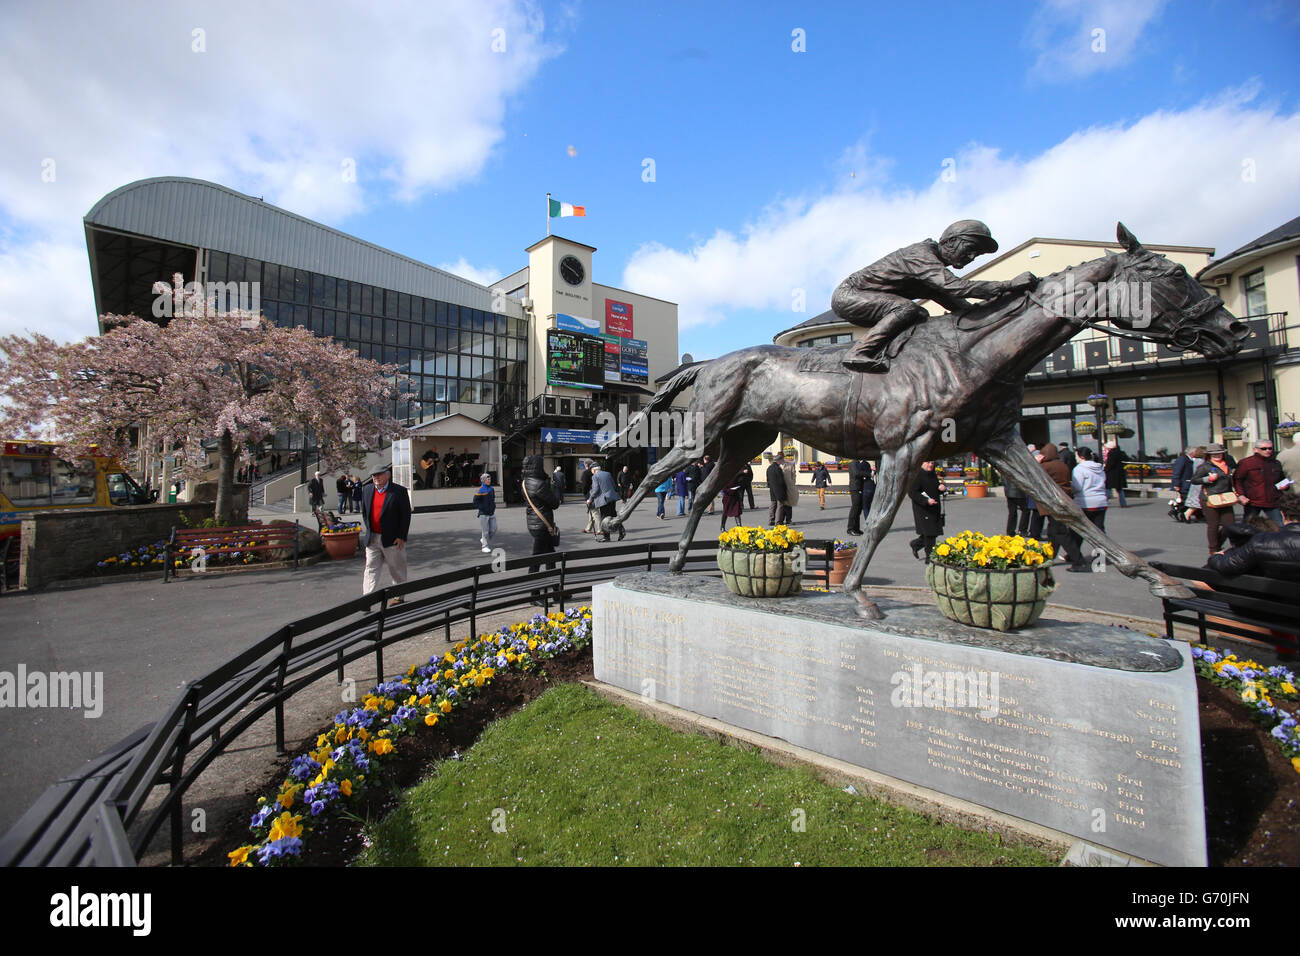 A stock picture of Vintage Crop Statue at the entrance to The Curragh Racecourse, Co Kildare, Ireland. Stock Photo